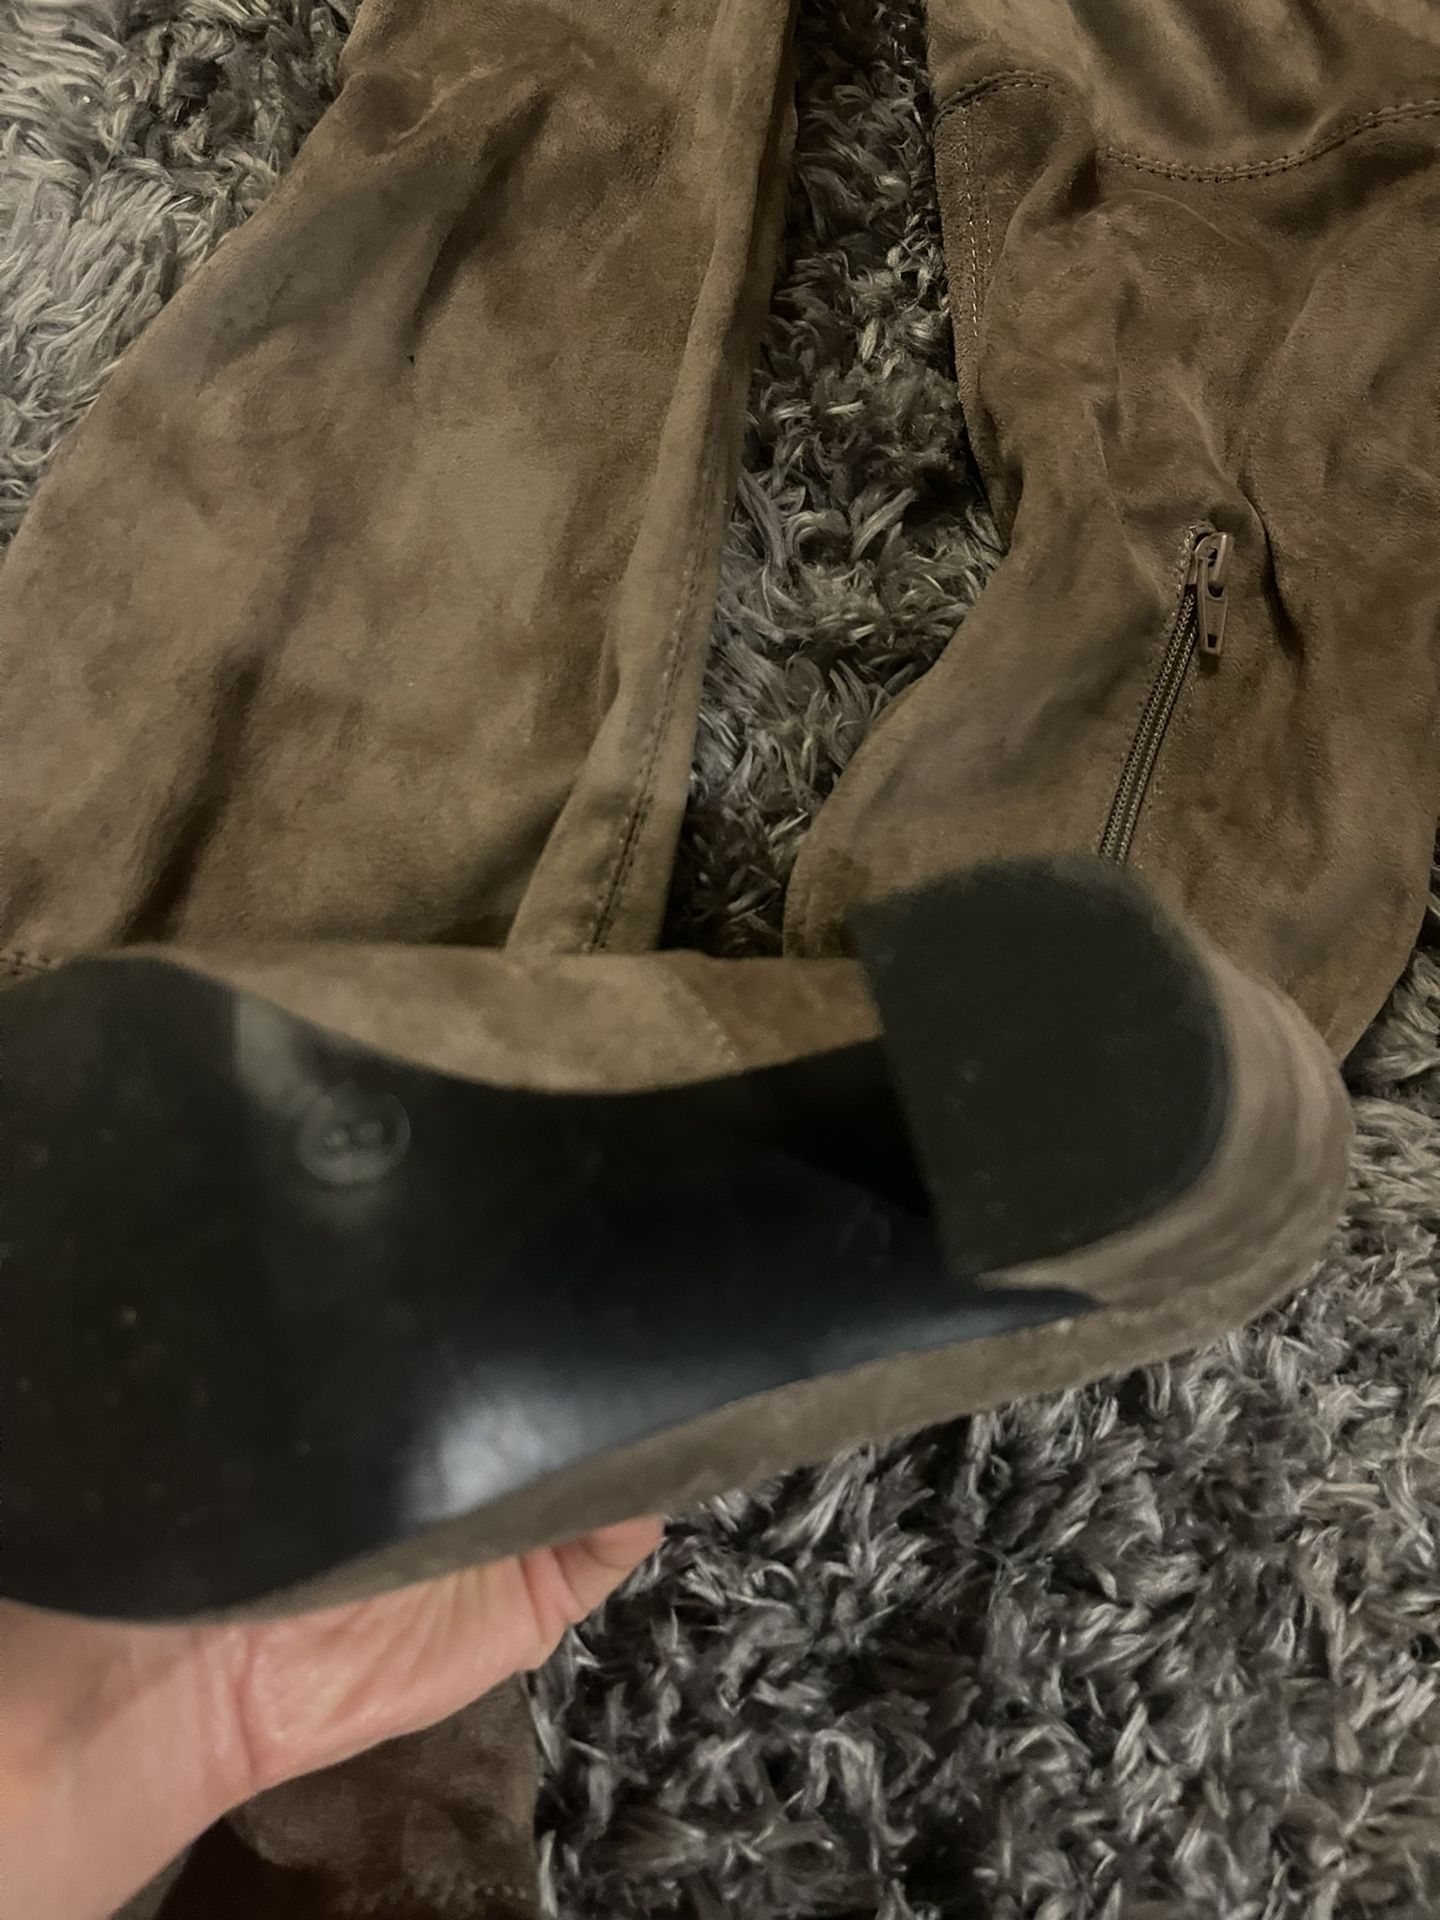 Suede Boots - Size 8 Brand New- Best Offer